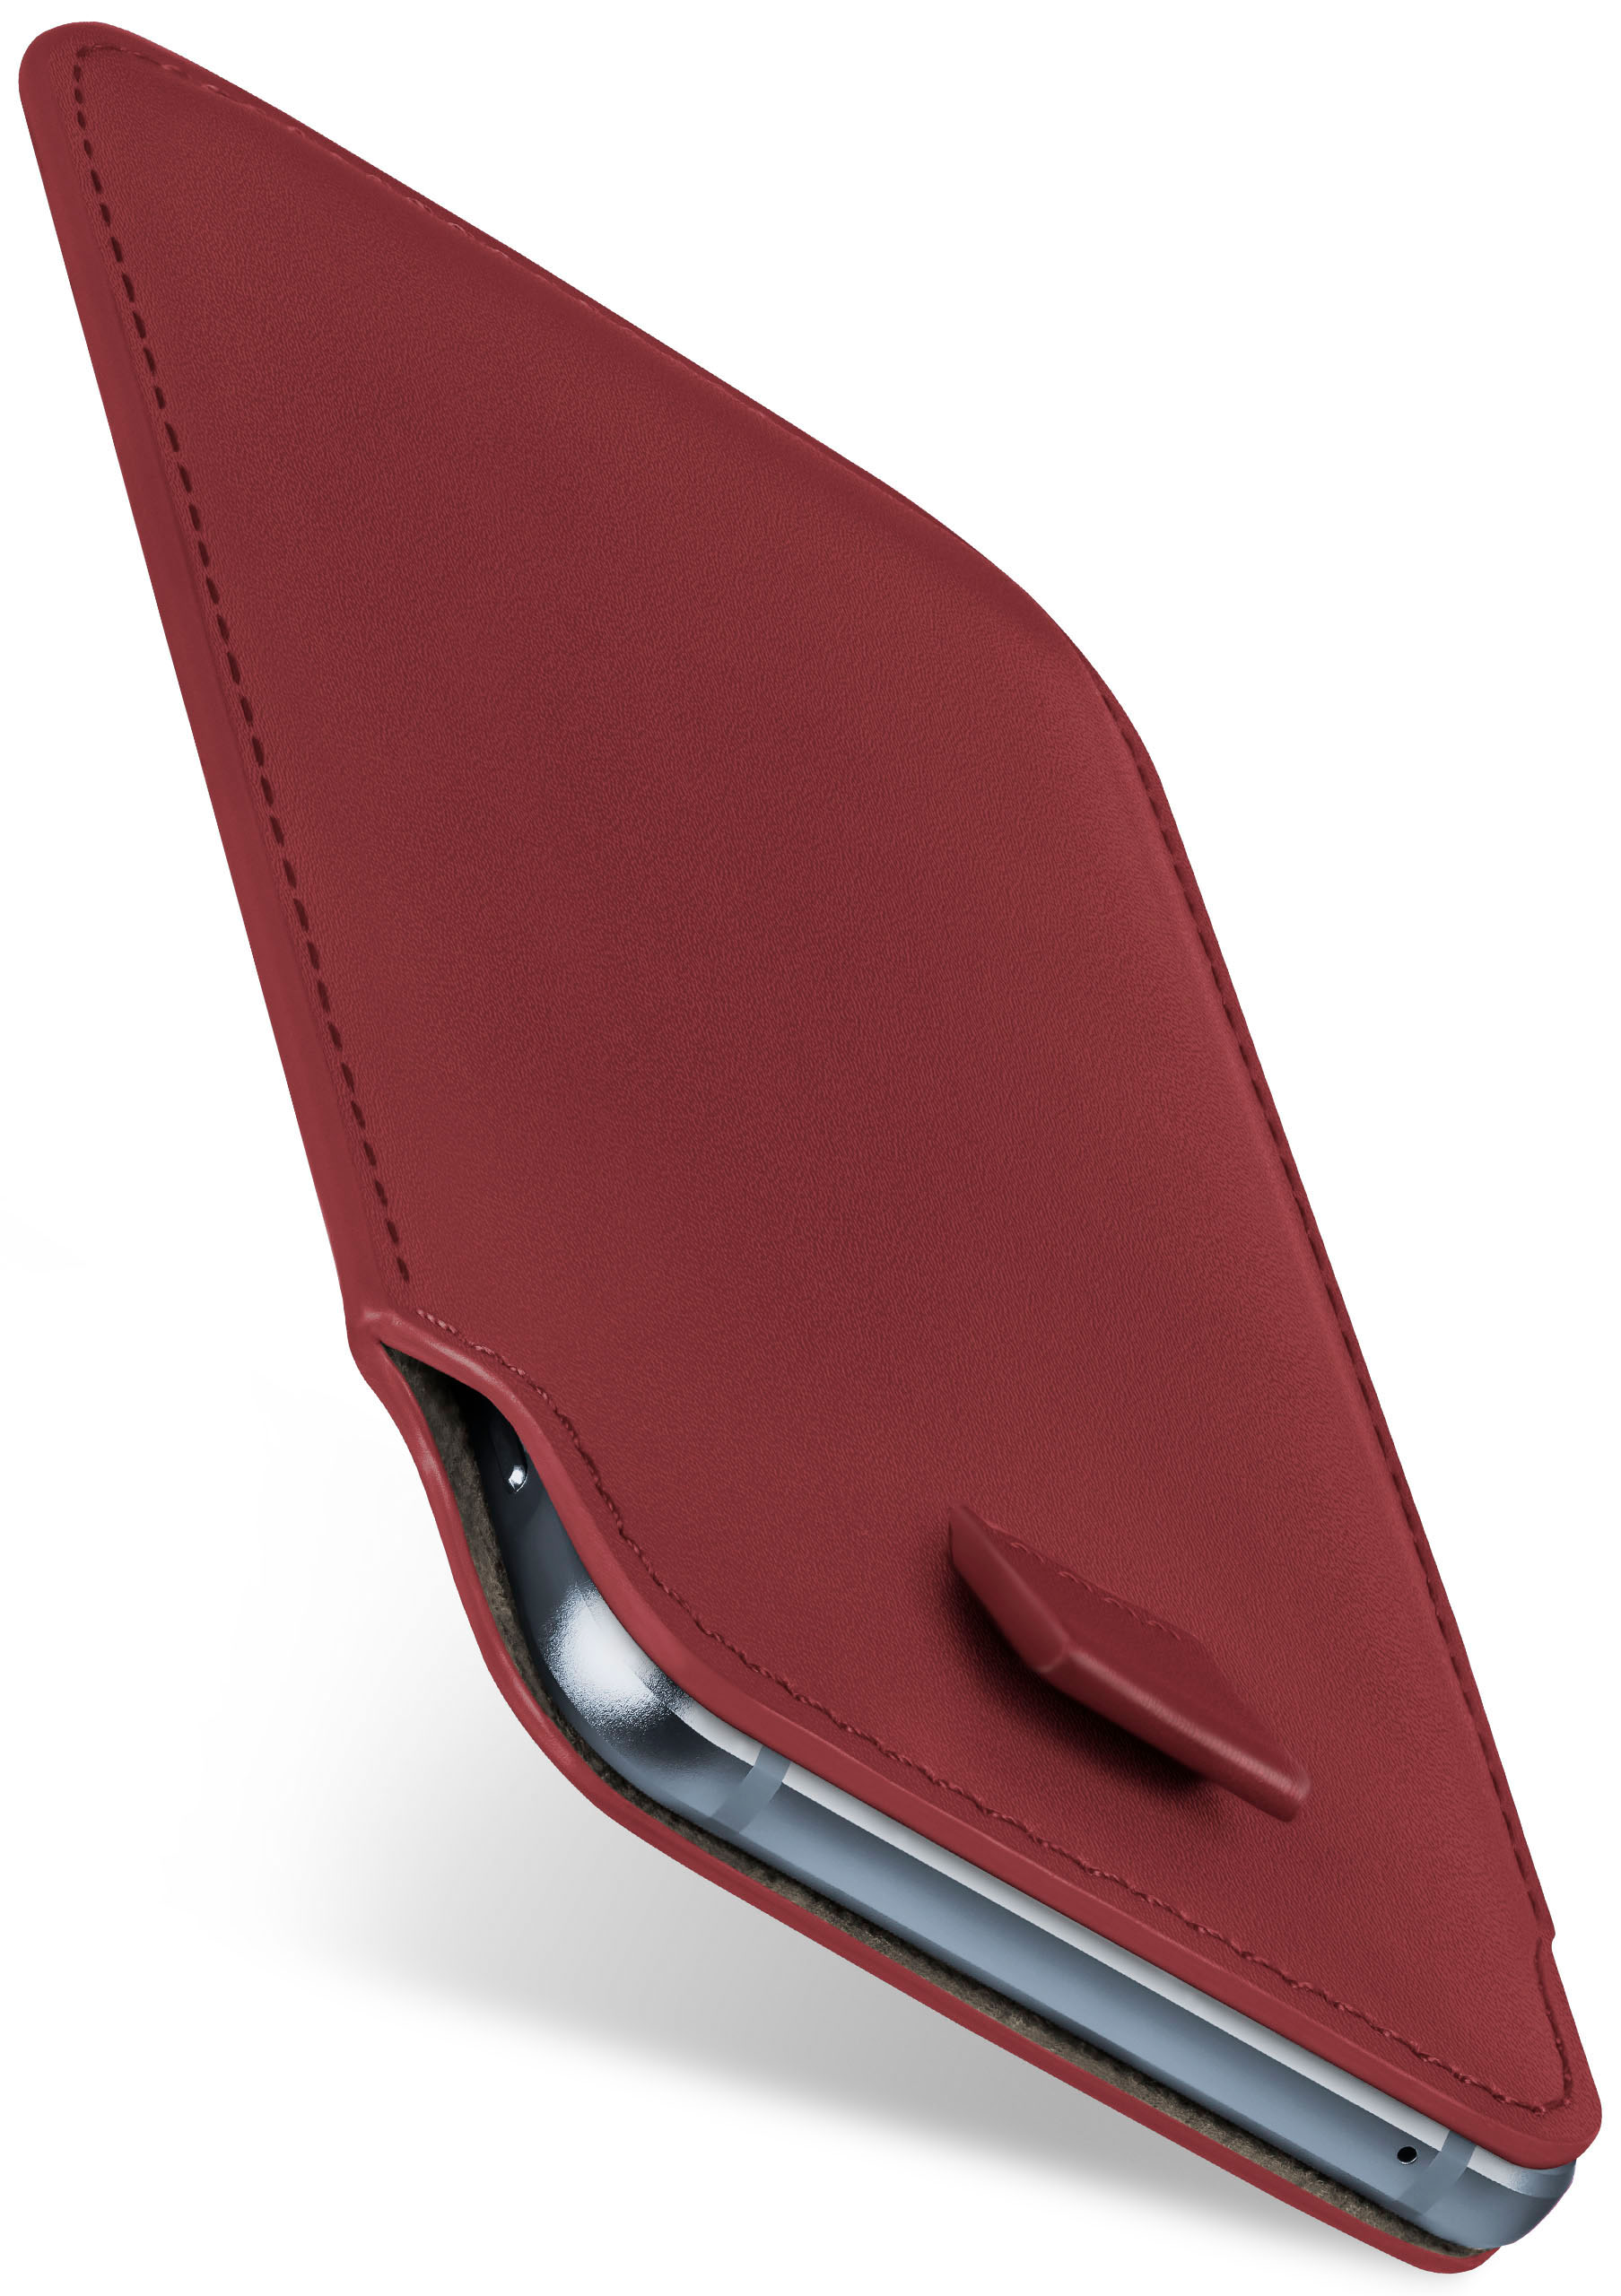 MOEX Slide Case, Full Cover, S21, Galaxy Maroon-Red Samsung